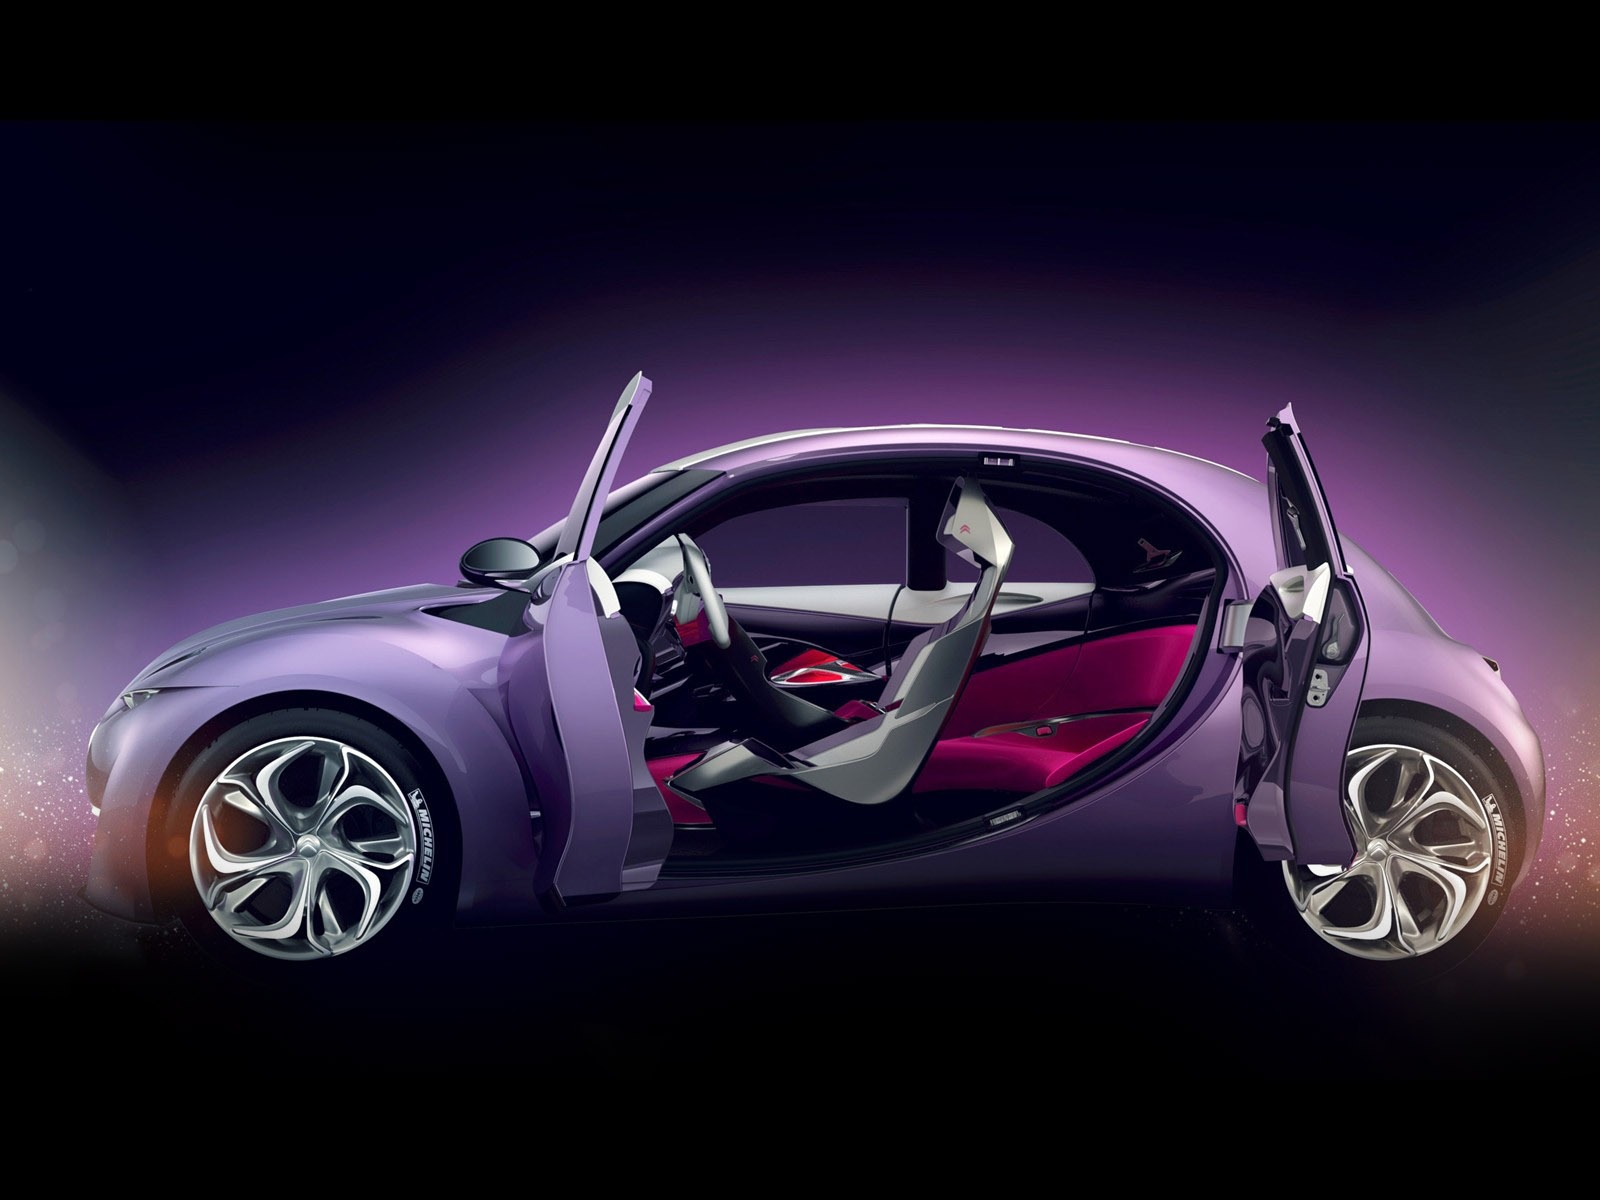 Special edition of concept cars wallpaper (13) #14 - 1600x1200